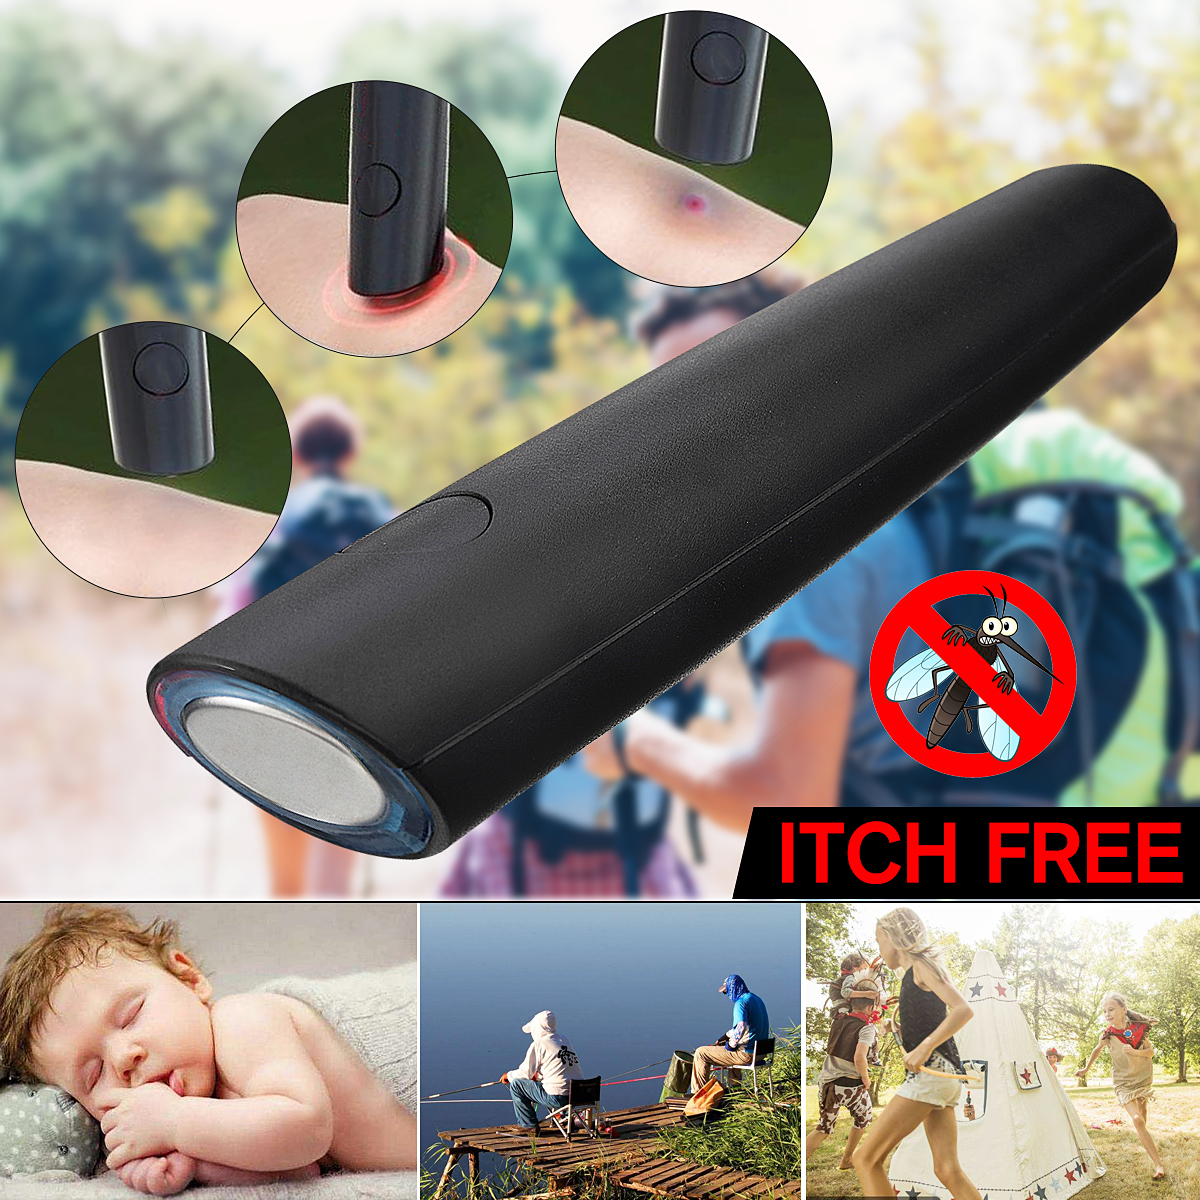 Garden-Outdoor-Mosquito-Relieve-Itching-Pen-Protable-Reliever-Pen-Face-Body-Massager-Neutralizing-It-1310795